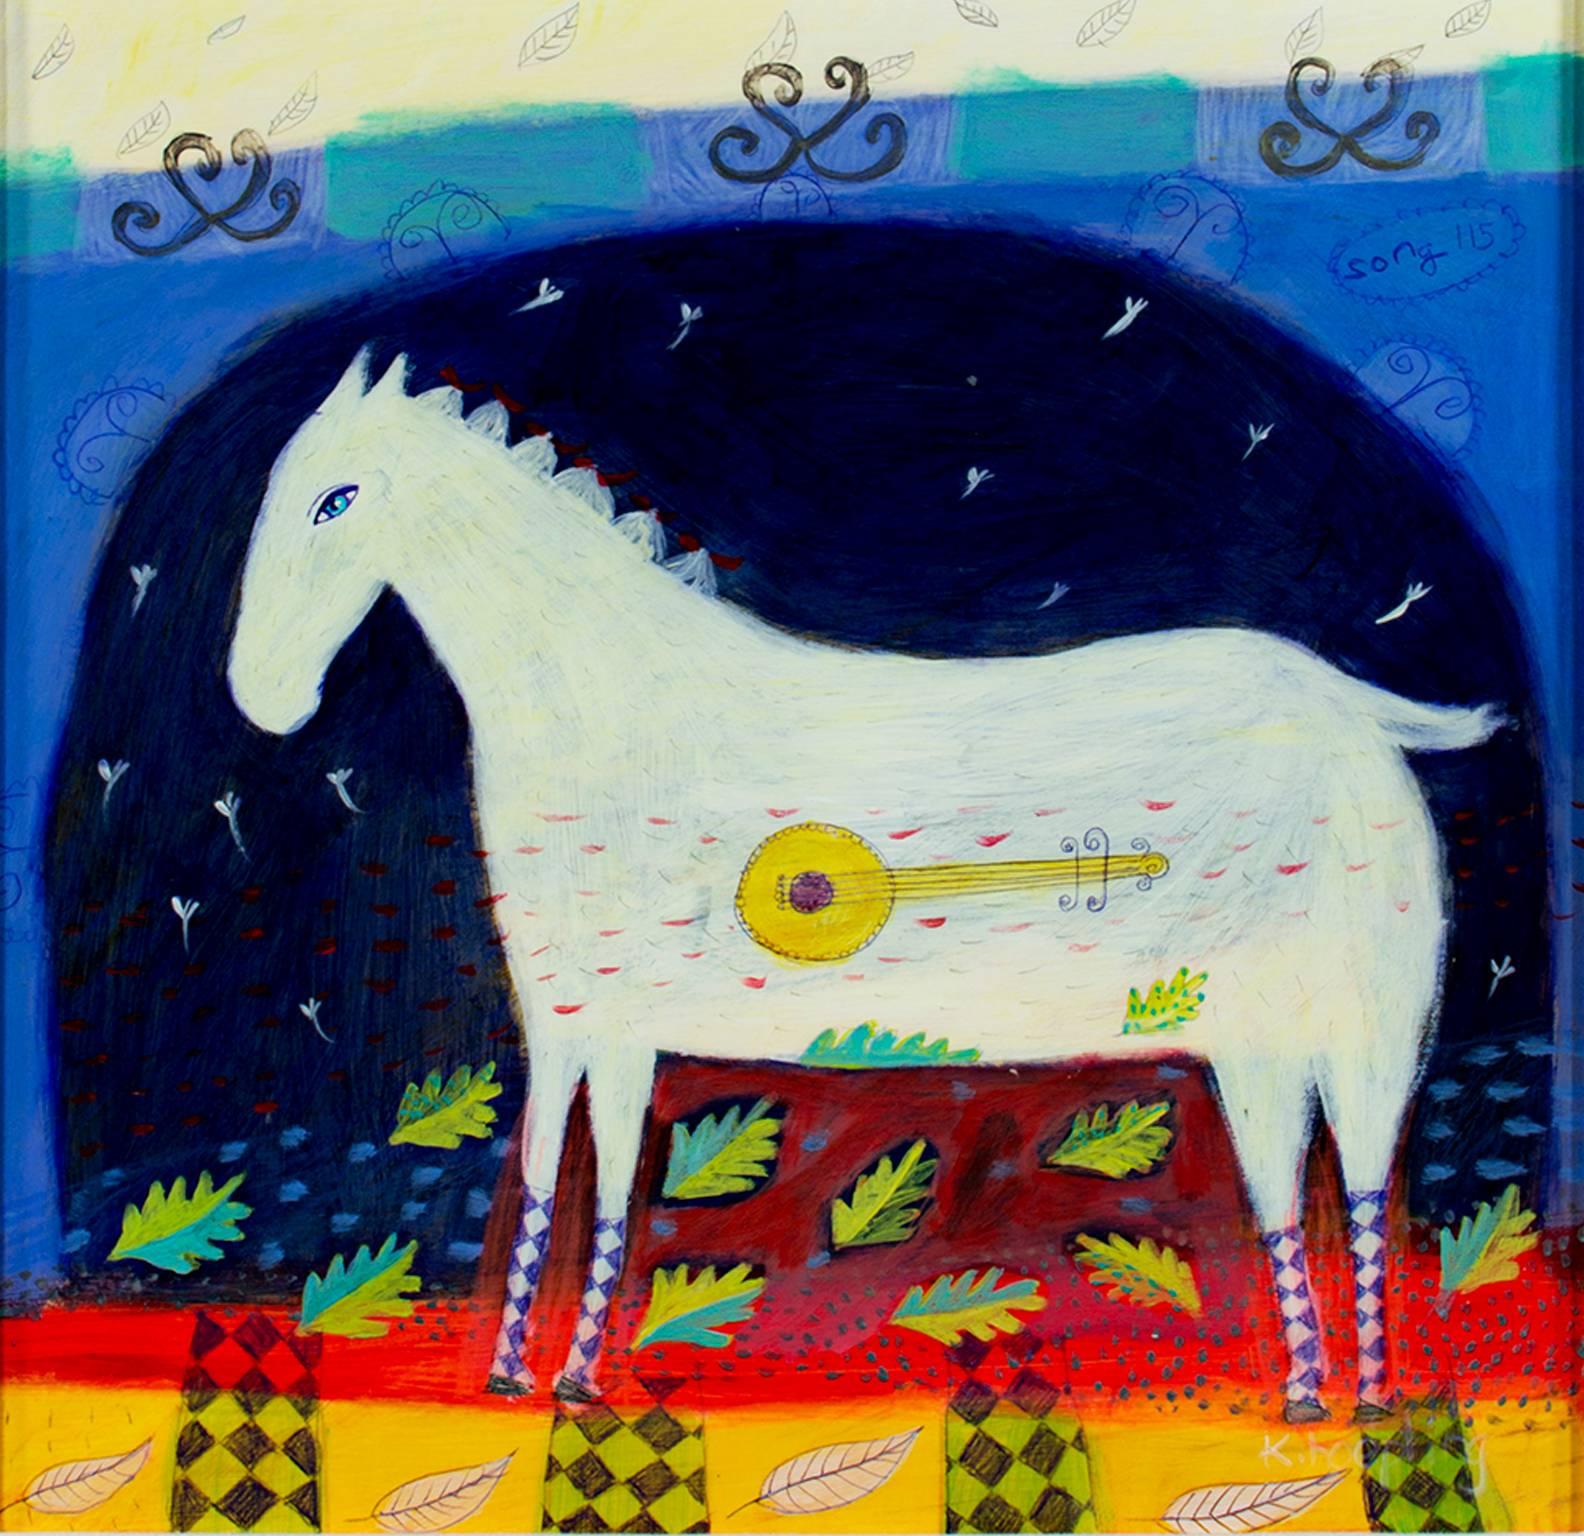 Karen Hoepting Animal Painting - "Song 115" Acrylic on Paper Expressionist Horse & Bango signed by Karen Hopeting